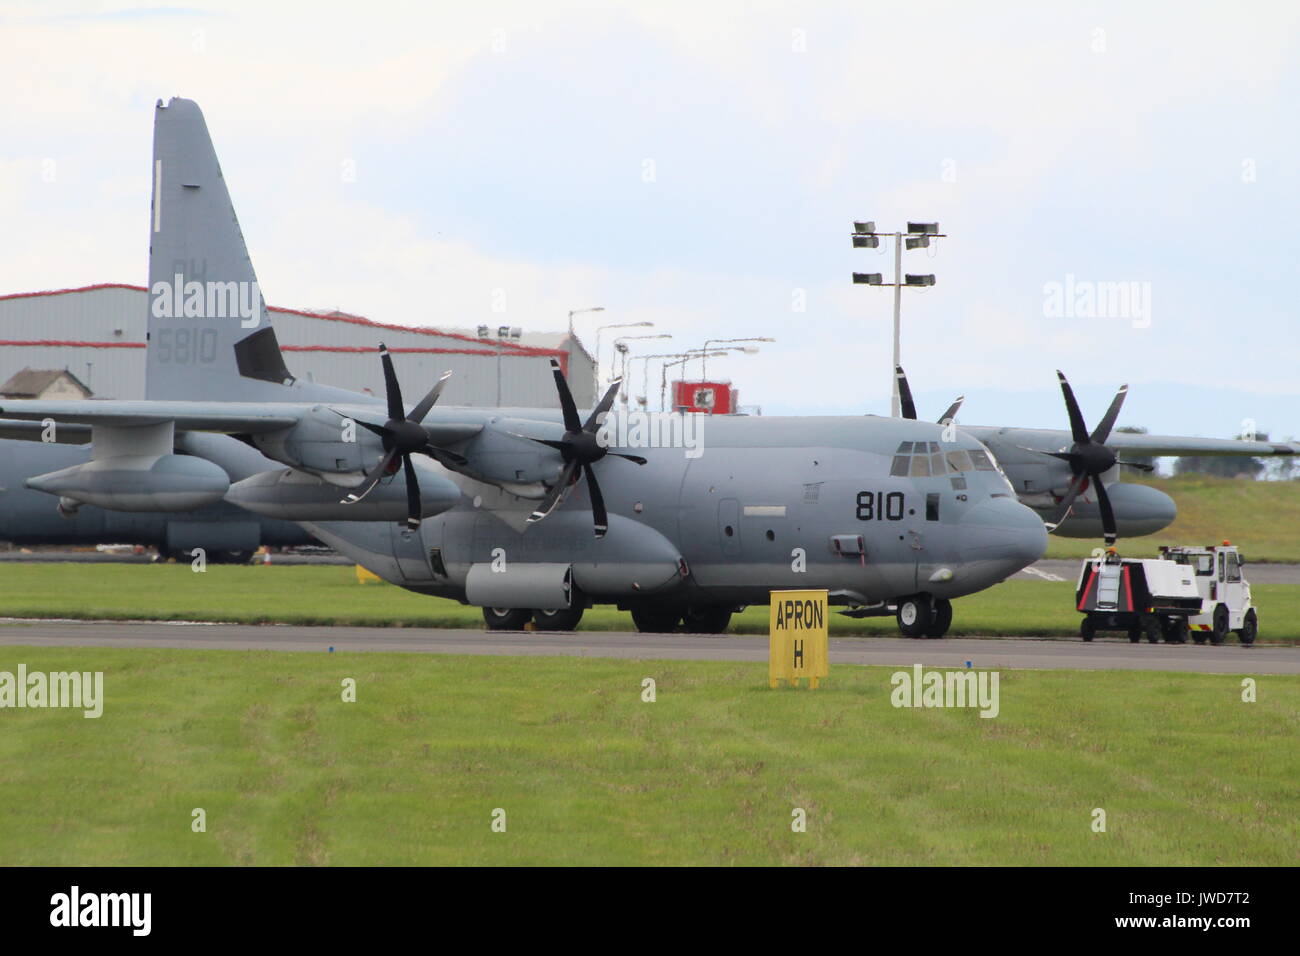 165810, a Lockheed Martin KC-130J operated by the United States Marine Corps, at Prestwick International Airport in Ayrshire. Stock Photo